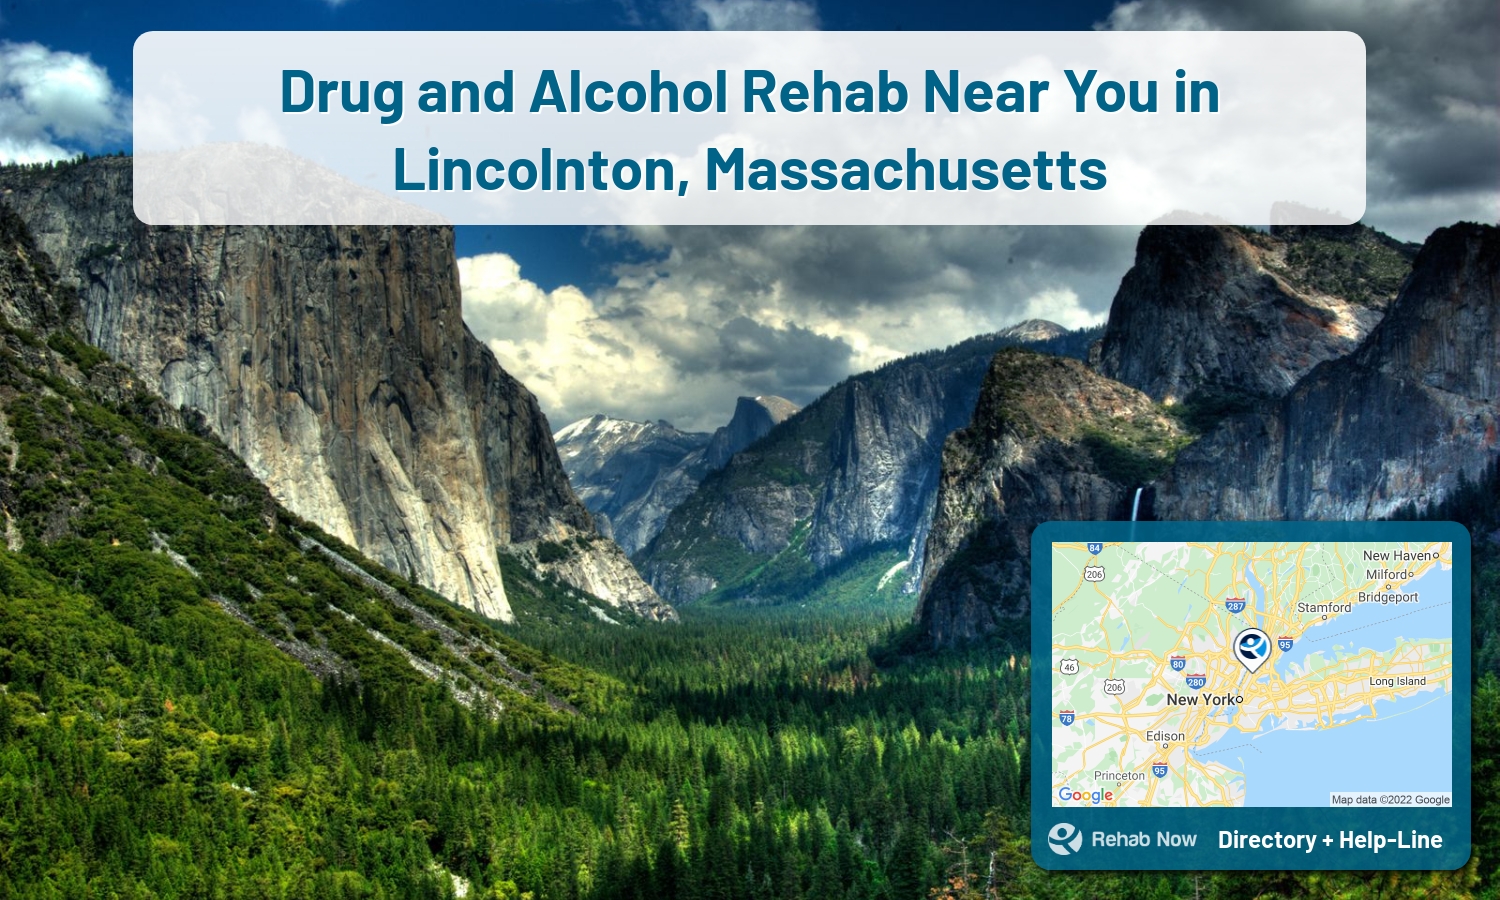 Lincolnton, MA Treatment Centers. Find drug rehab in Lincolnton, Massachusetts, or detox and treatment programs. Get the right help now!